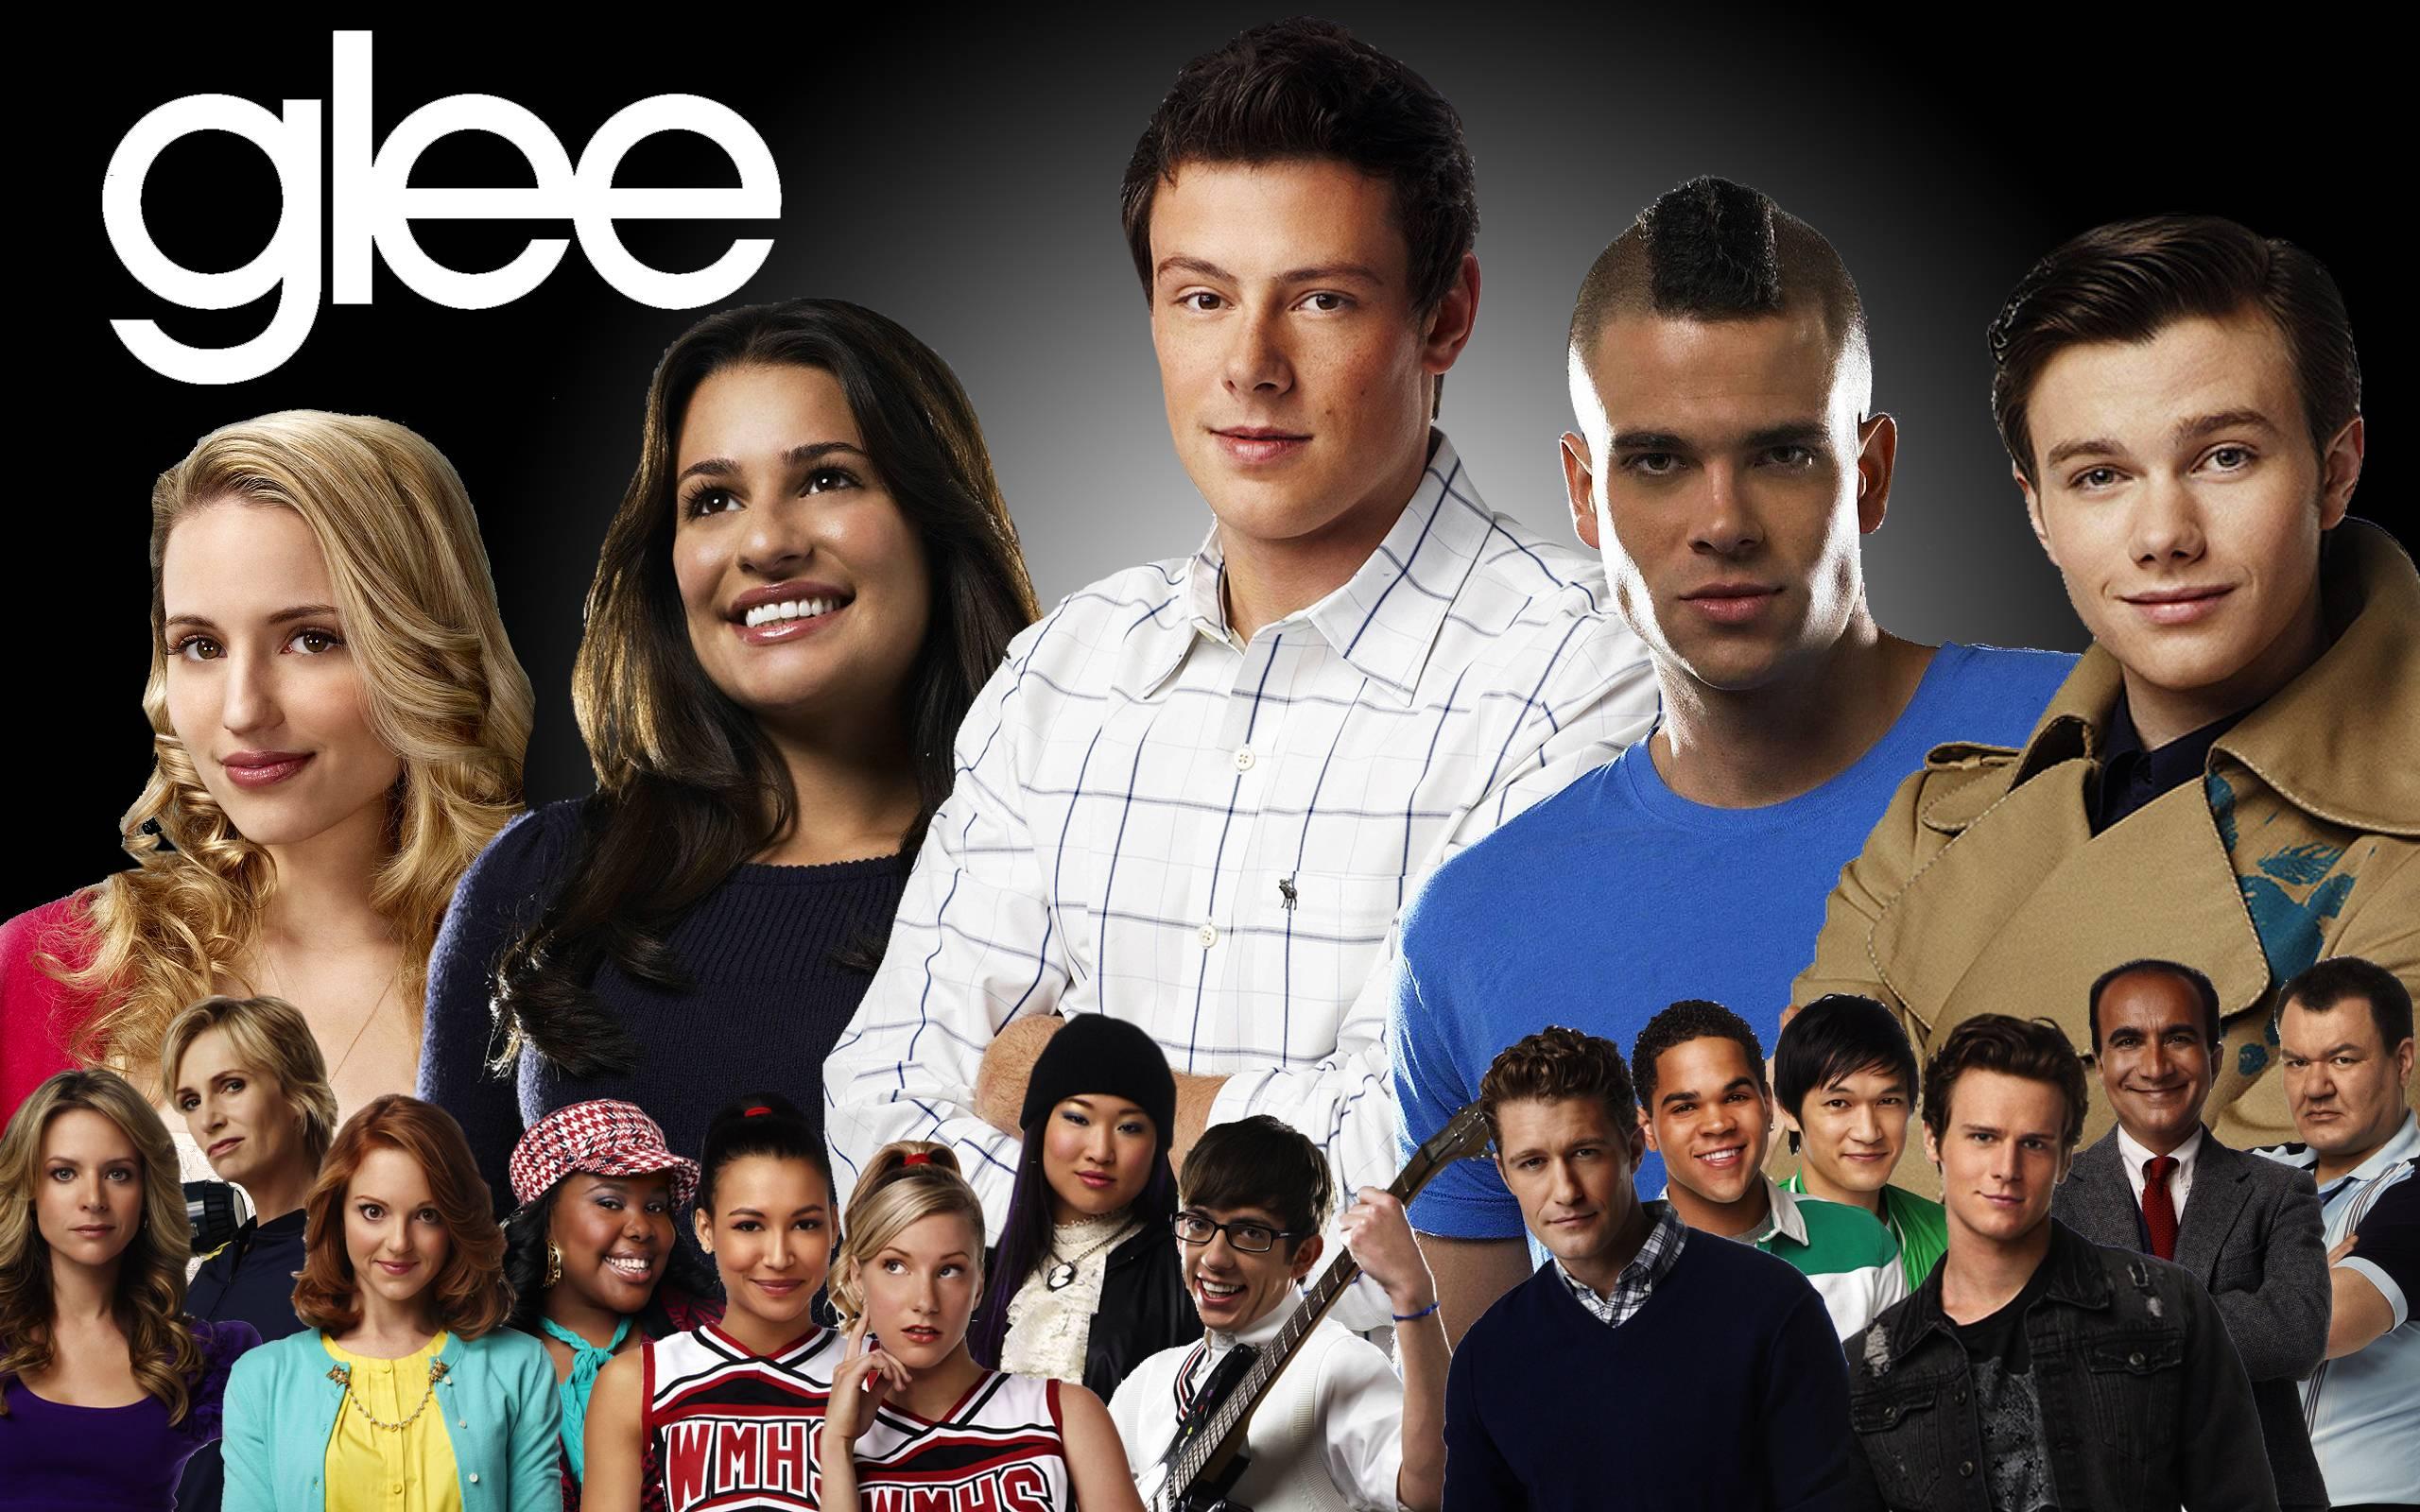 Glee Funny wallpaper for iPhone, iOS, Android TV Series